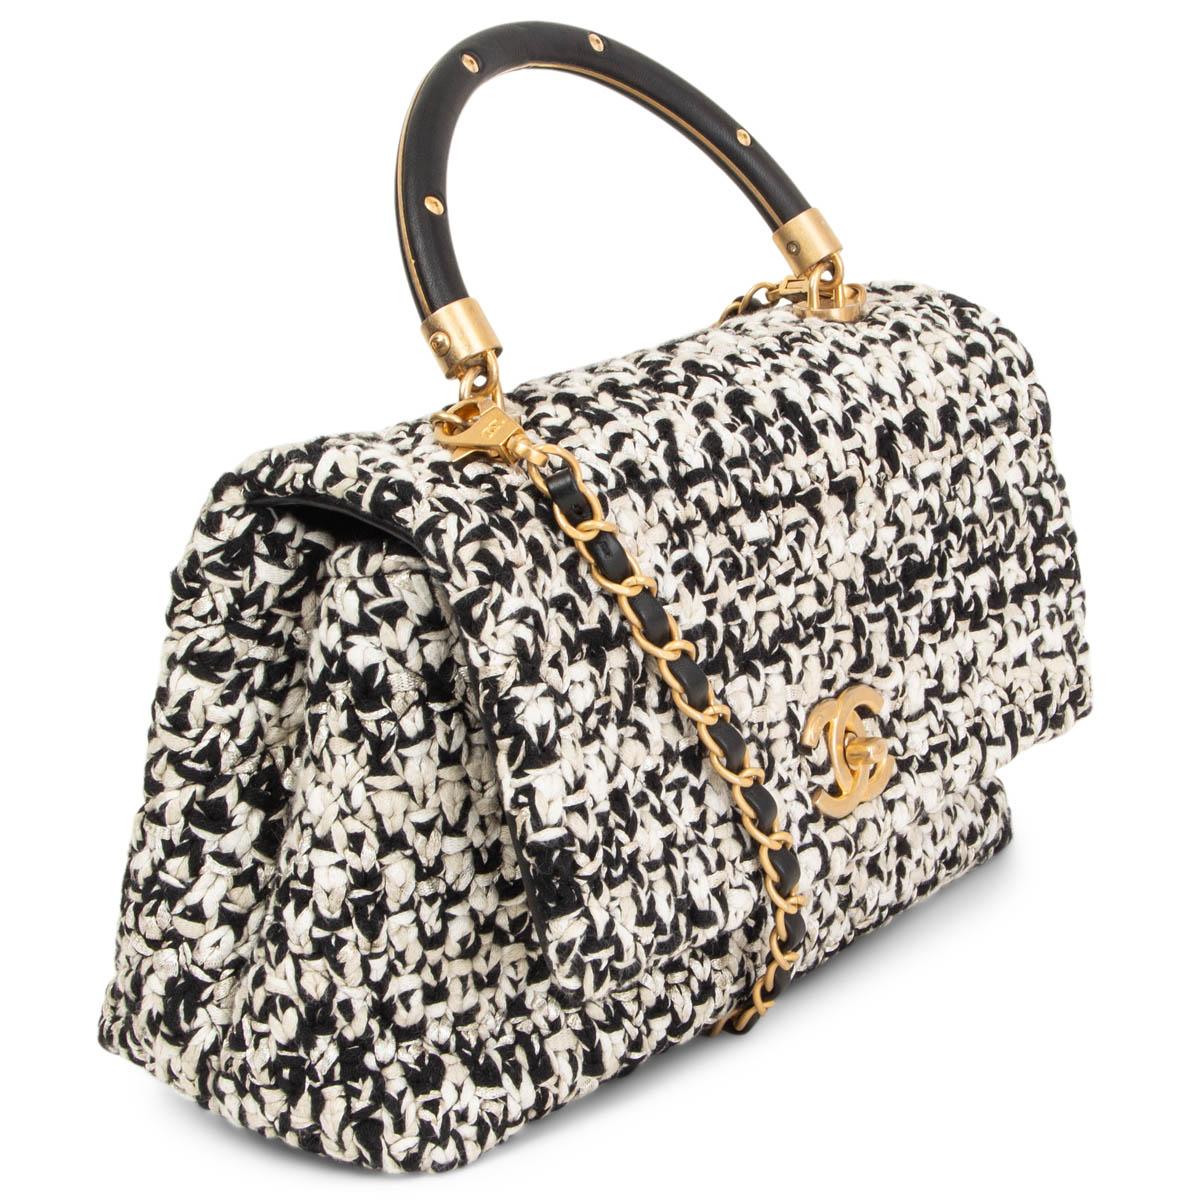 100% authentic Chanel 2018 Small Coco Top Handle Bag in light grey, white and black crochet tweed featuring black calfskin bottom, handle and detachable shoulder-strap. Opens with a gold-tone CC turn-lock and is lined in sand canvas with one zipper